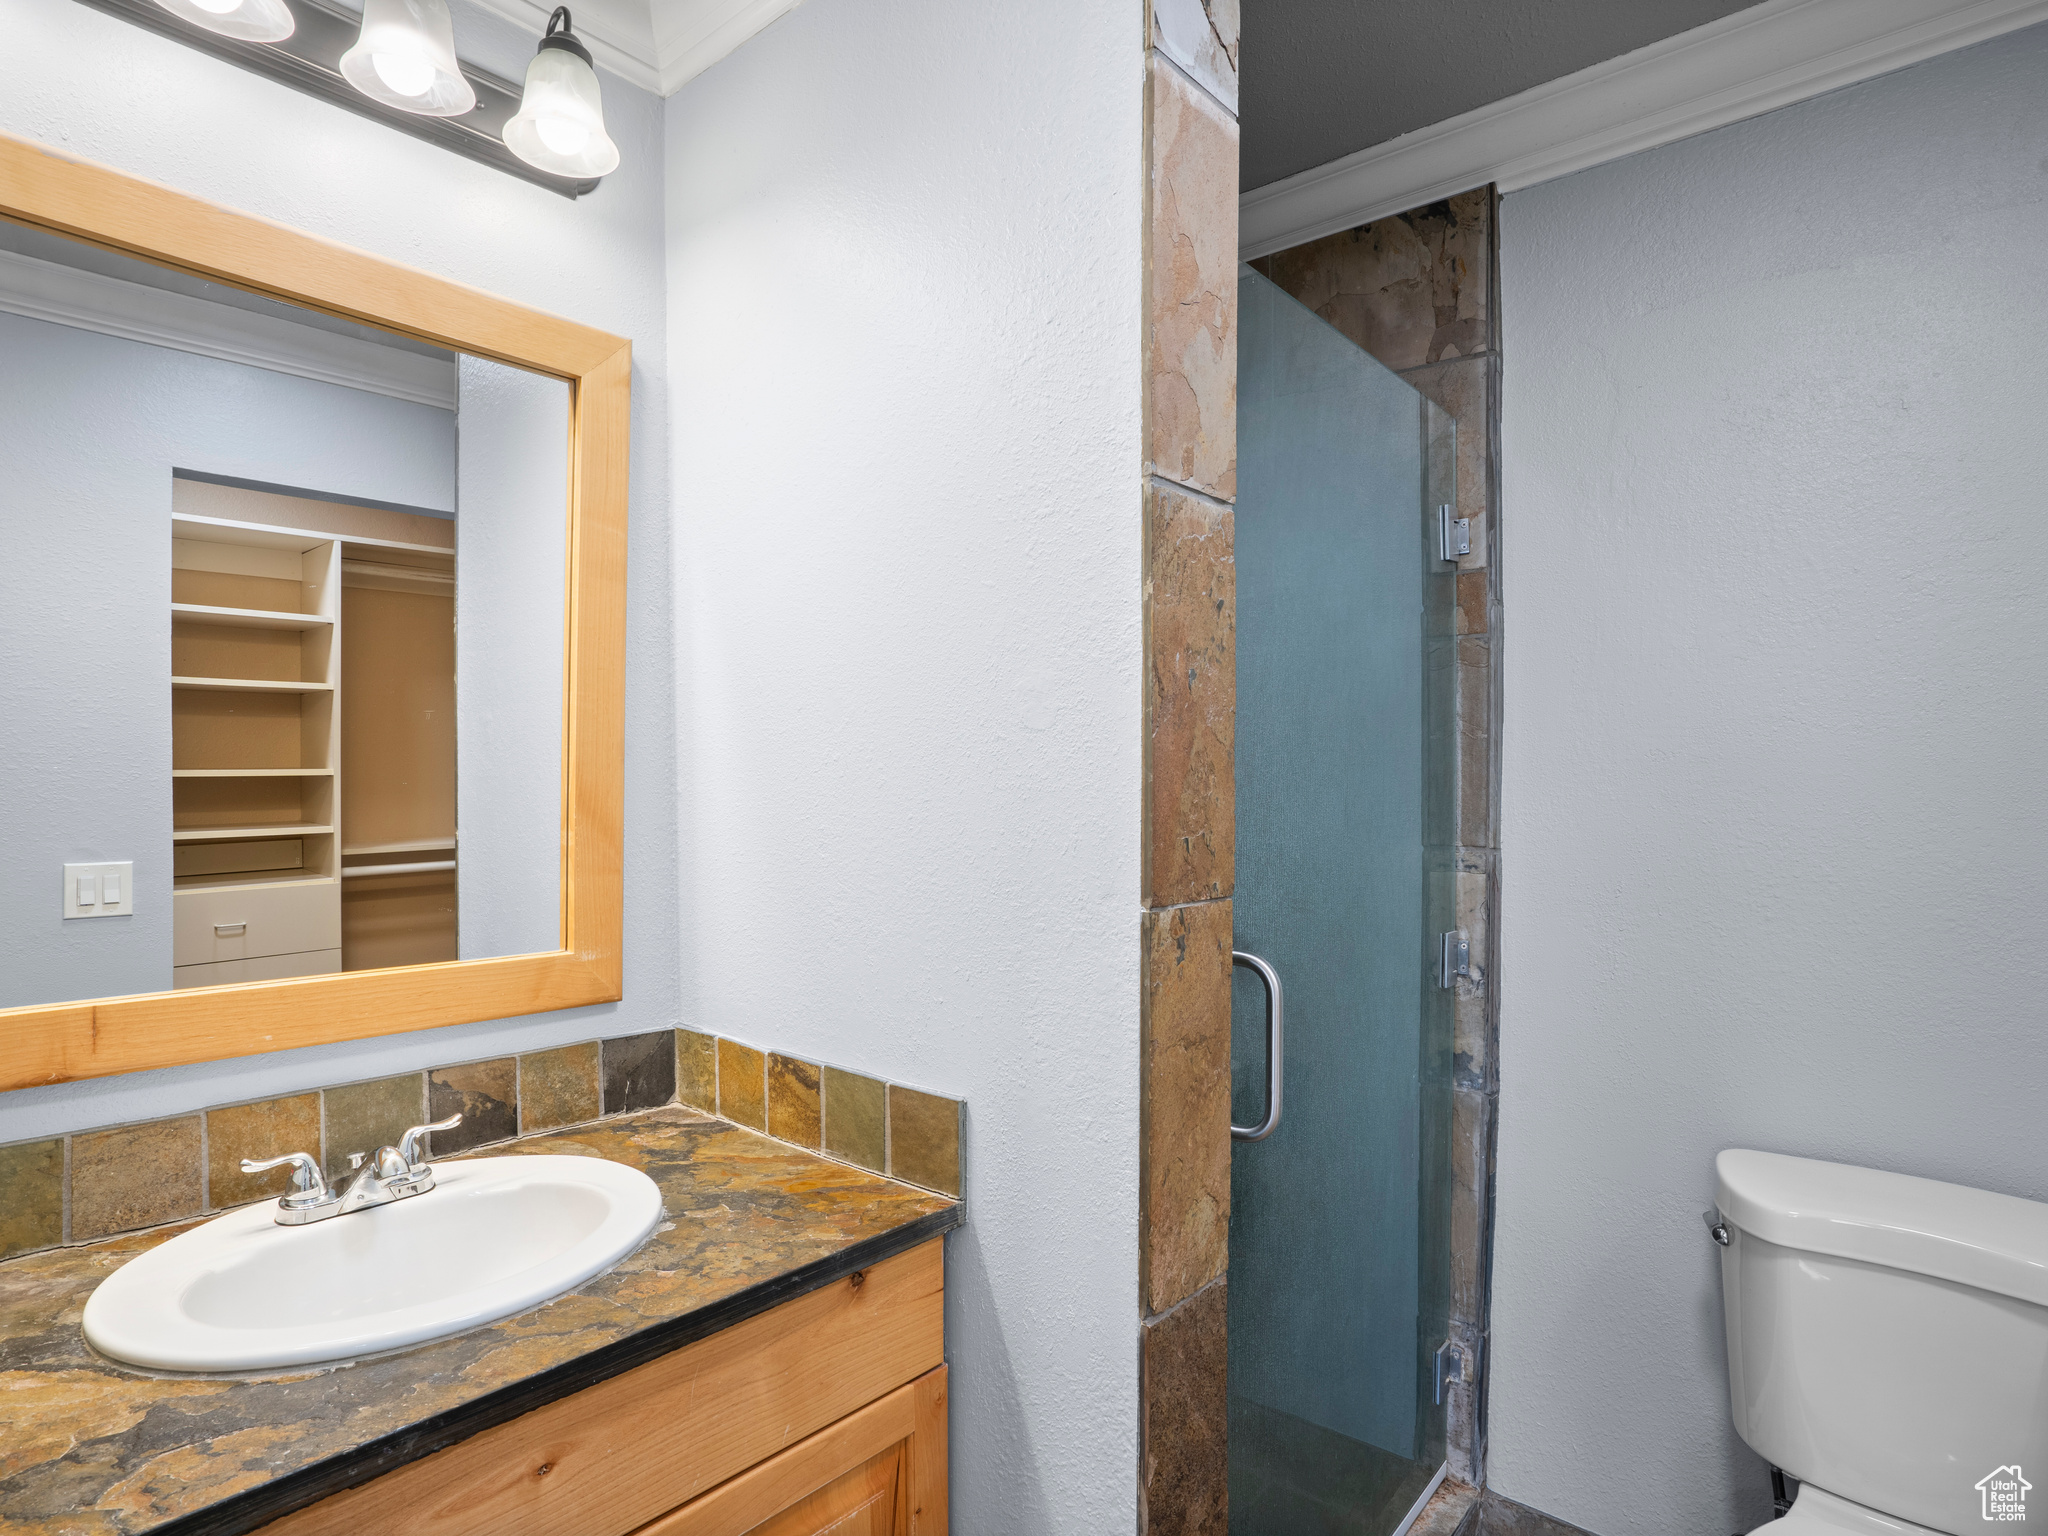 Bathroom with walk in shower, vanity, crown molding, and toilet